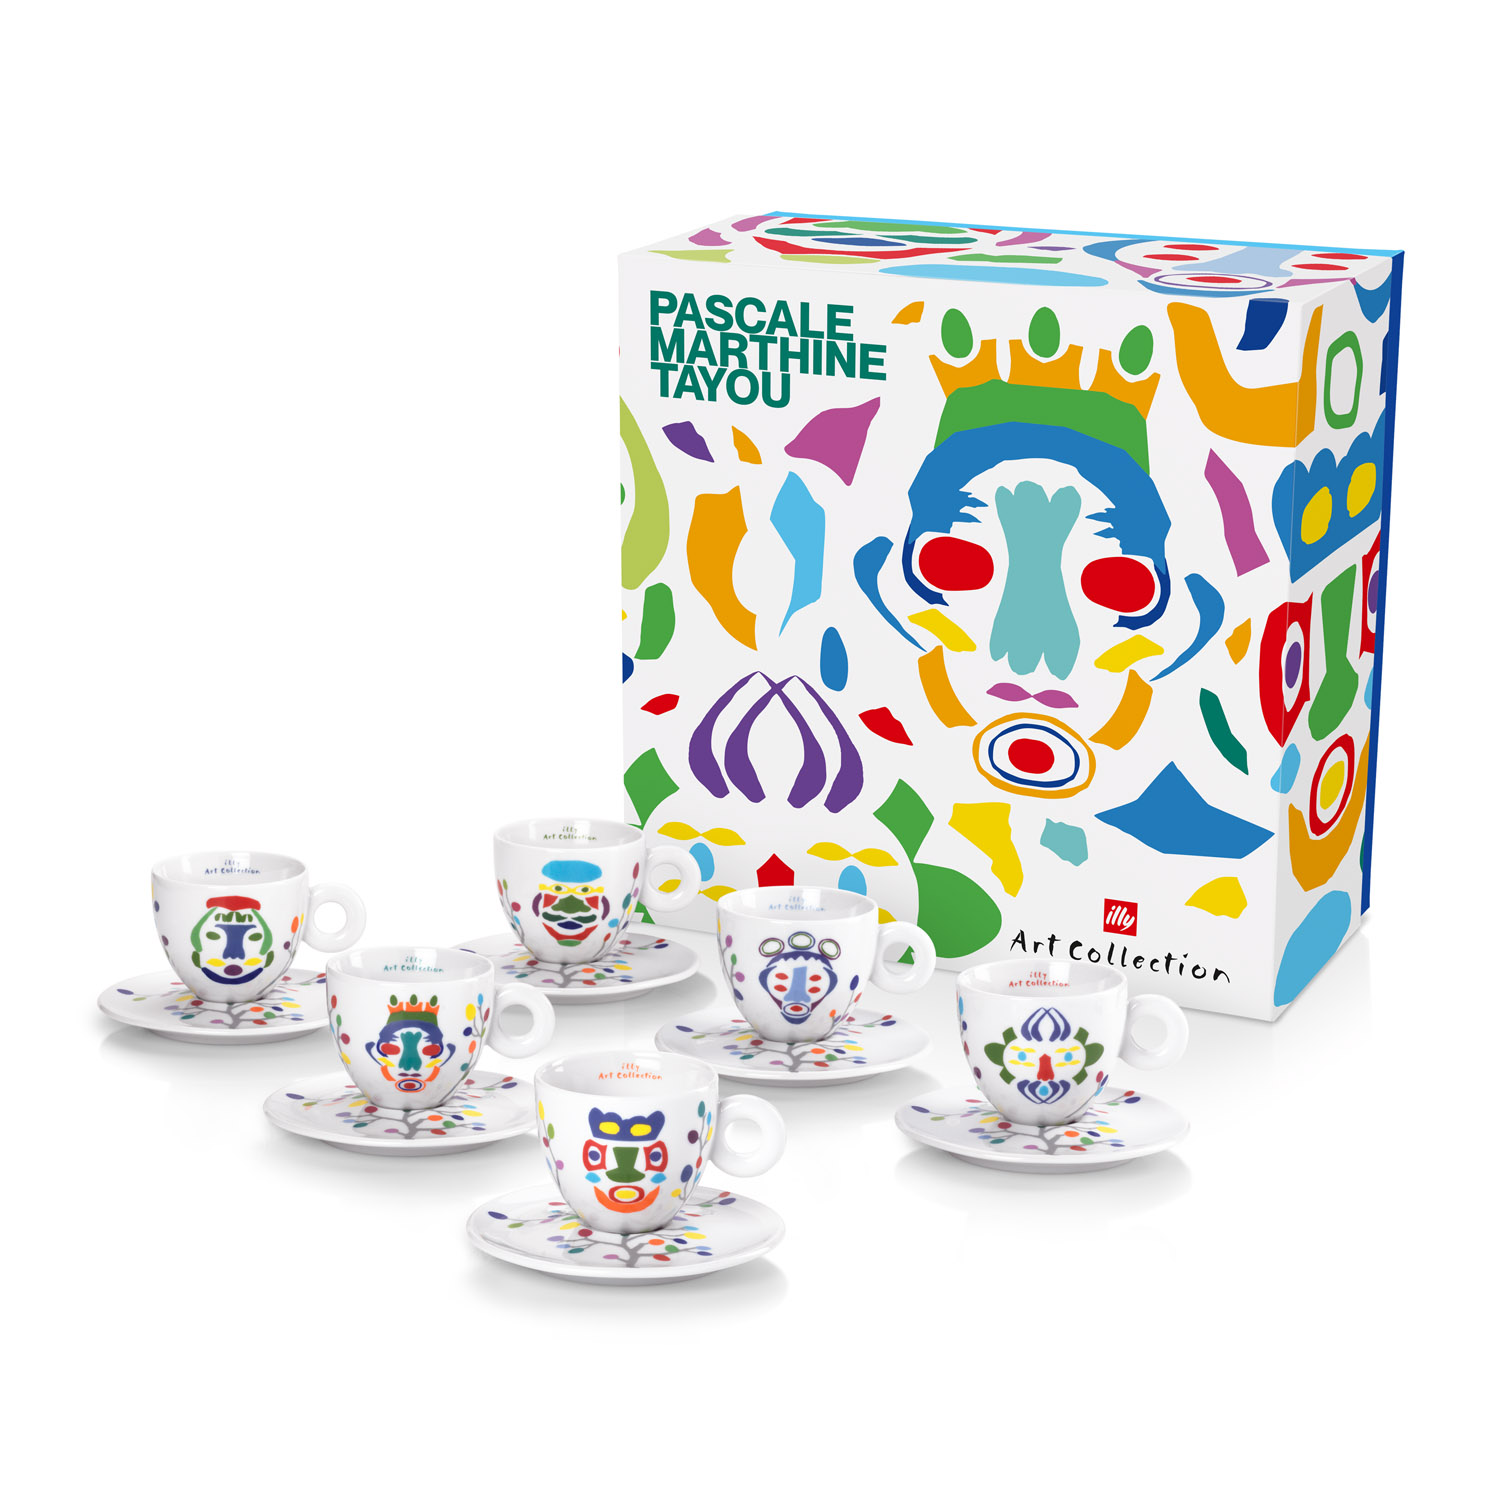 illy Art Collection PASCALE MARTHINE TAYOU Gift Set 6 Cappuccino Cups, Cups, 02-02-6091